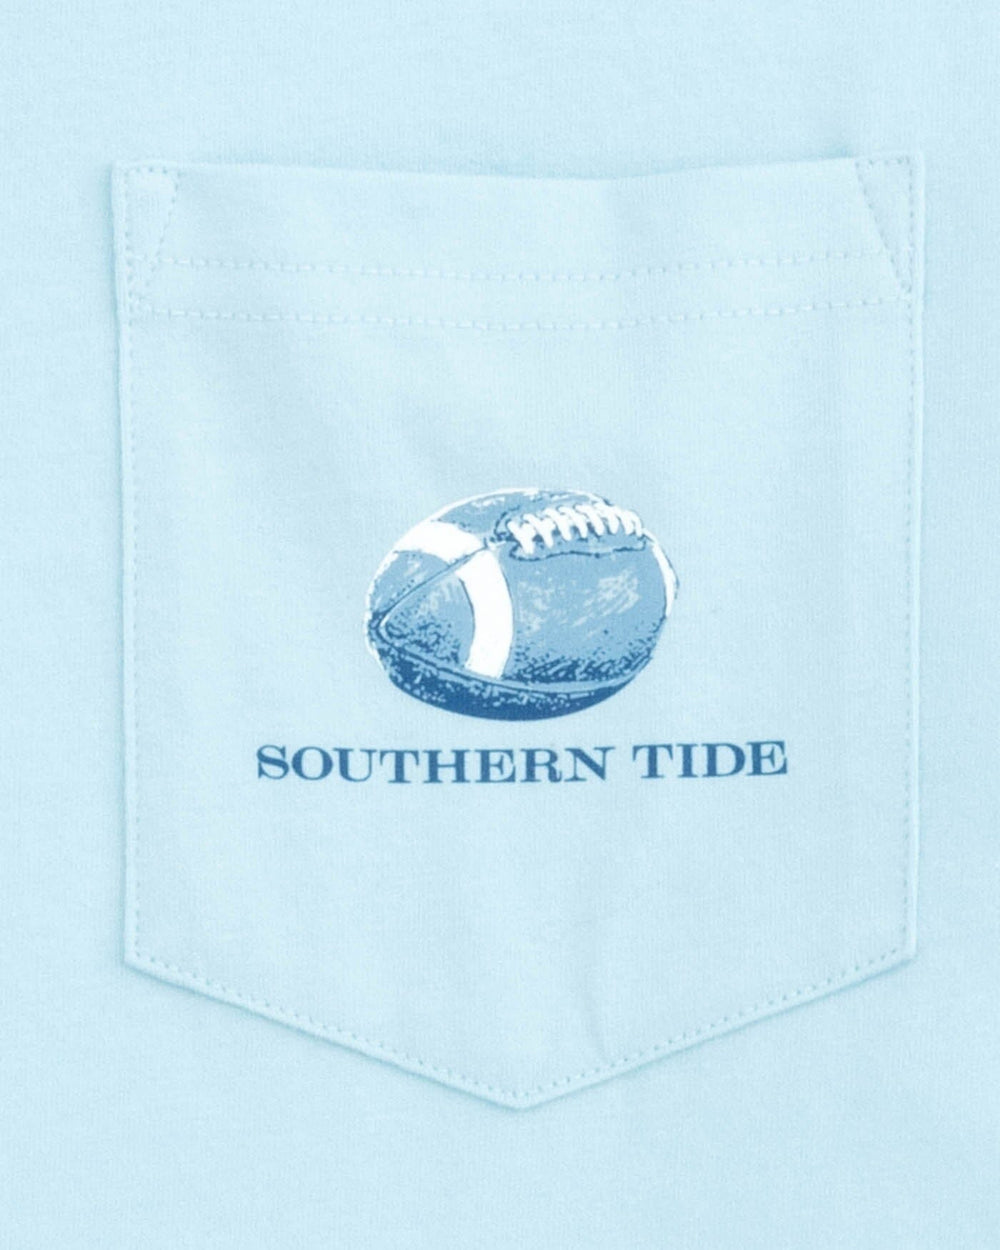 The detail view of the Southern Tide brrr-eeze Heather Performance Polo Shirt by Southern Tide - Dream Blue